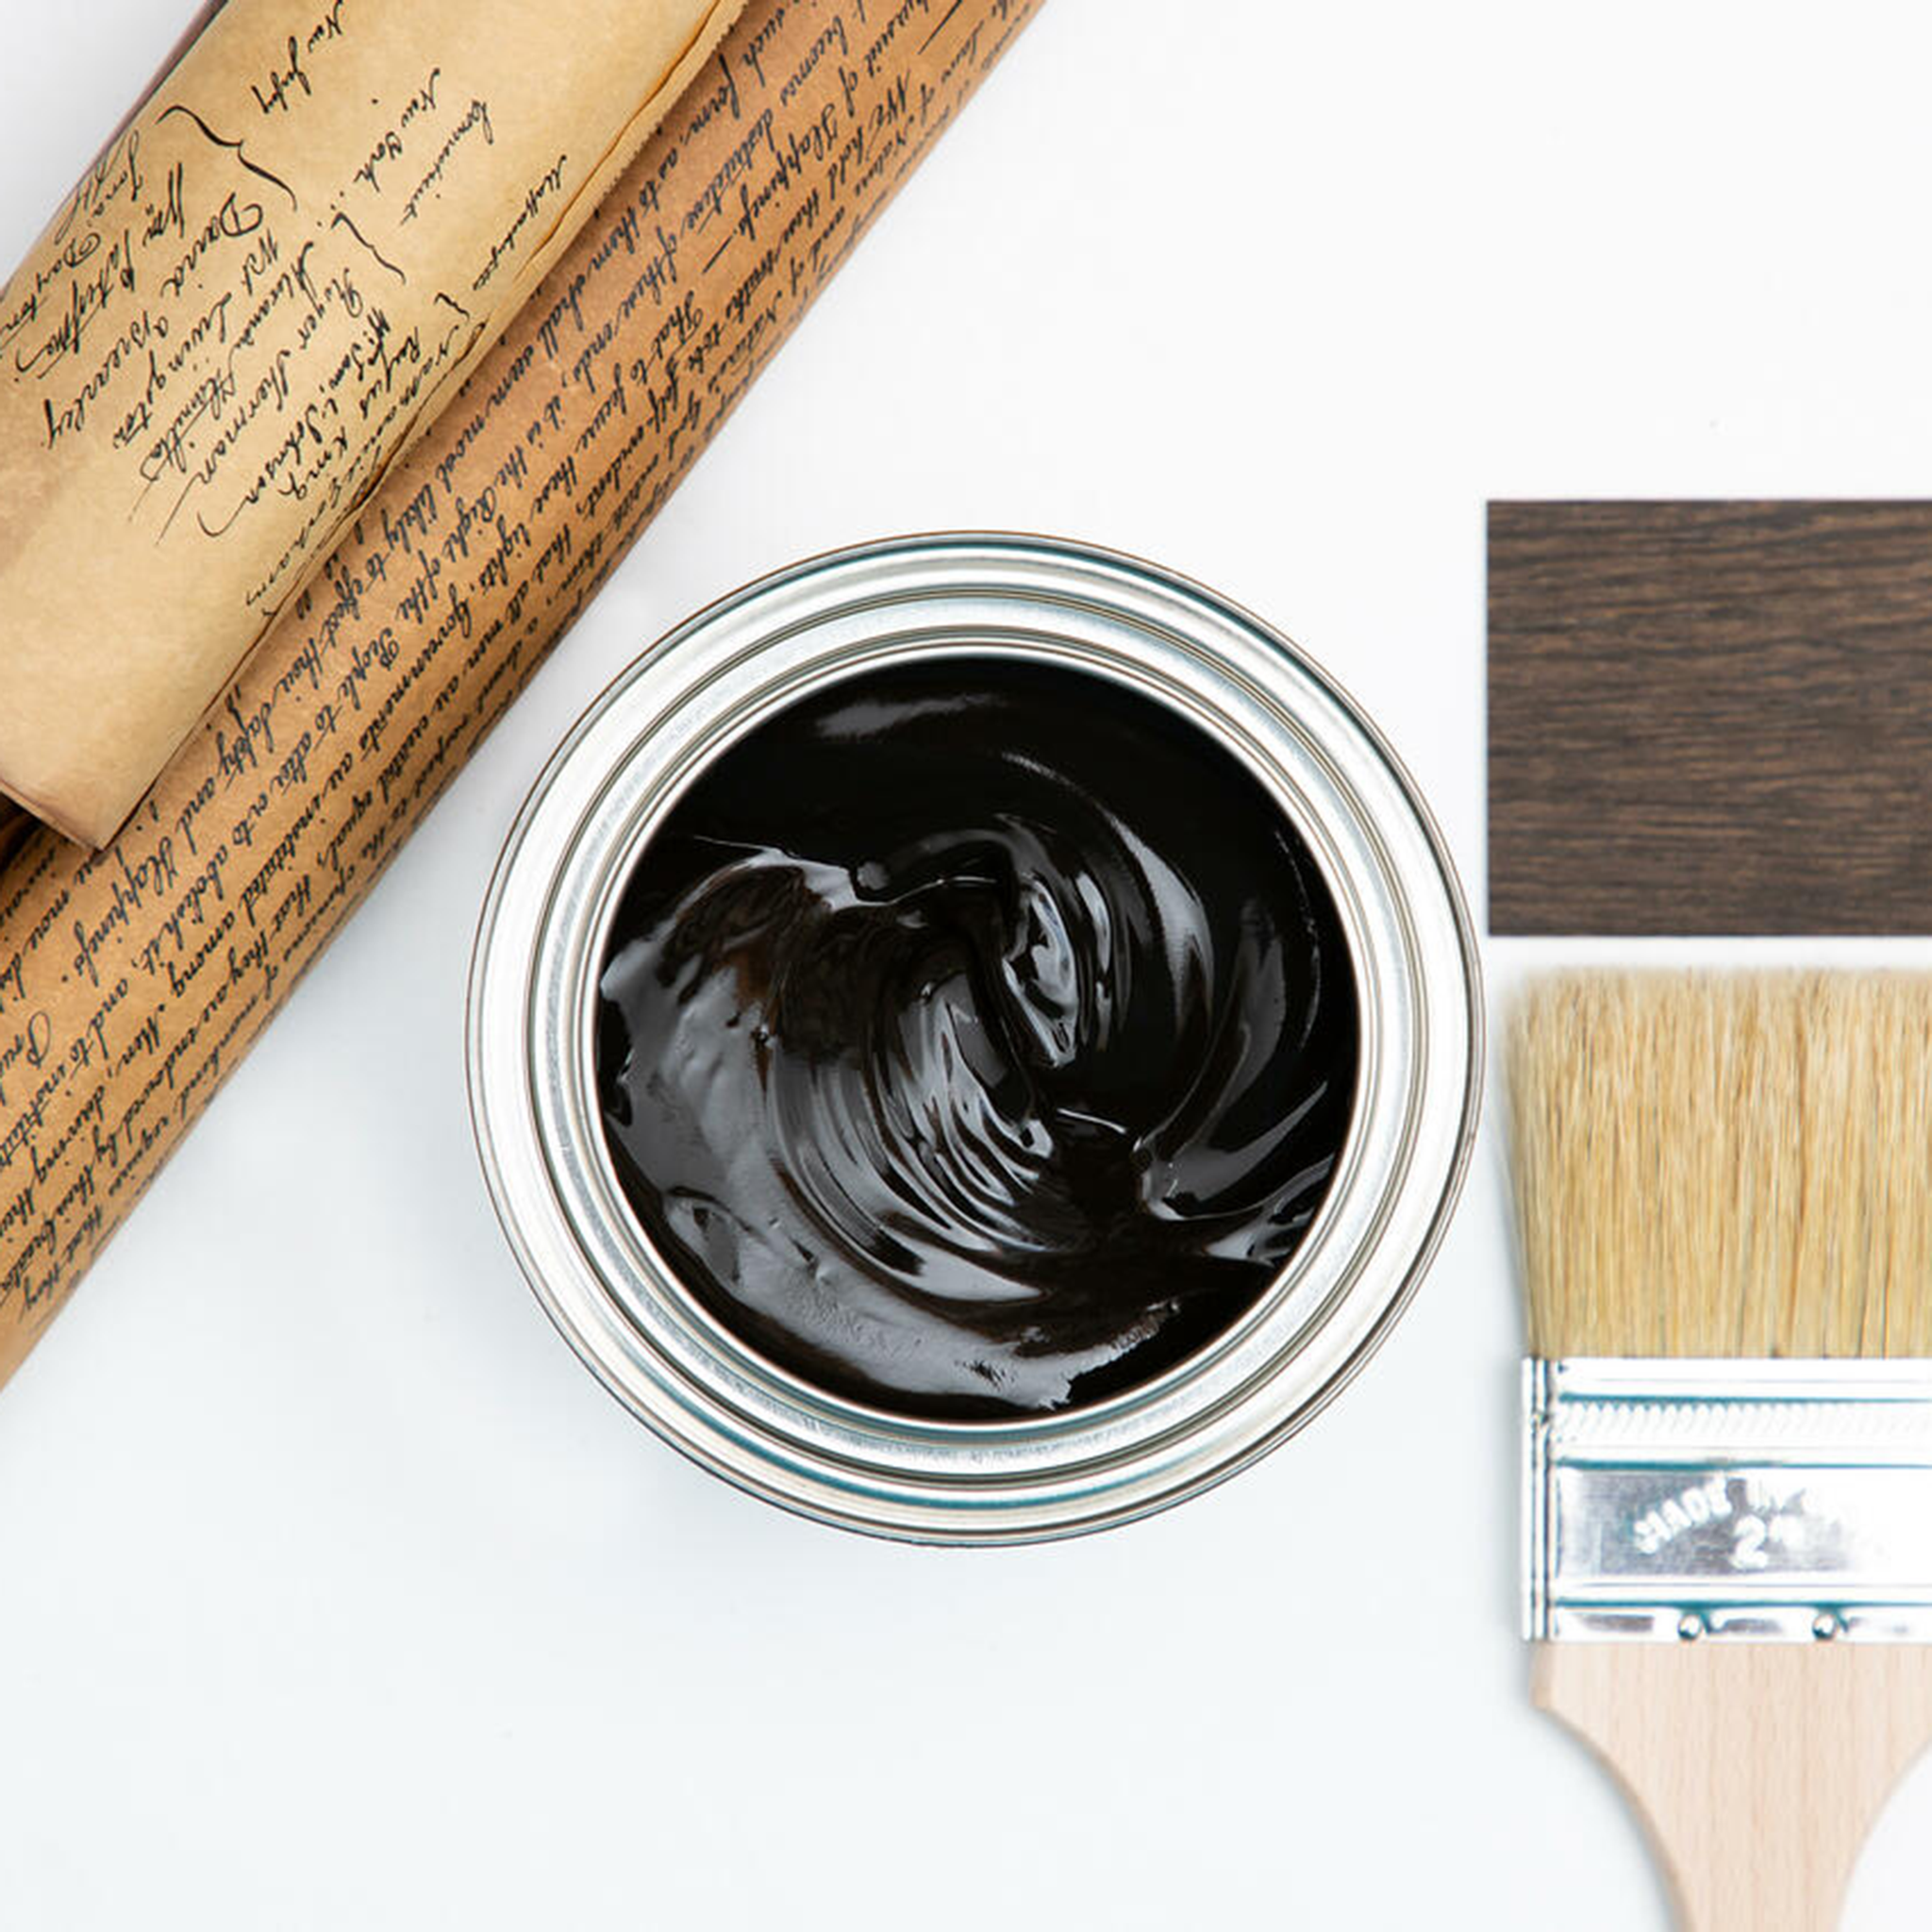 A arial view of an open can of Dixie Belle's No Pain Gel Stain in Walnut is against a white background. The can is surrounded by a paint brush, a parchment scroll, and a wood swatch featuring the stain color.